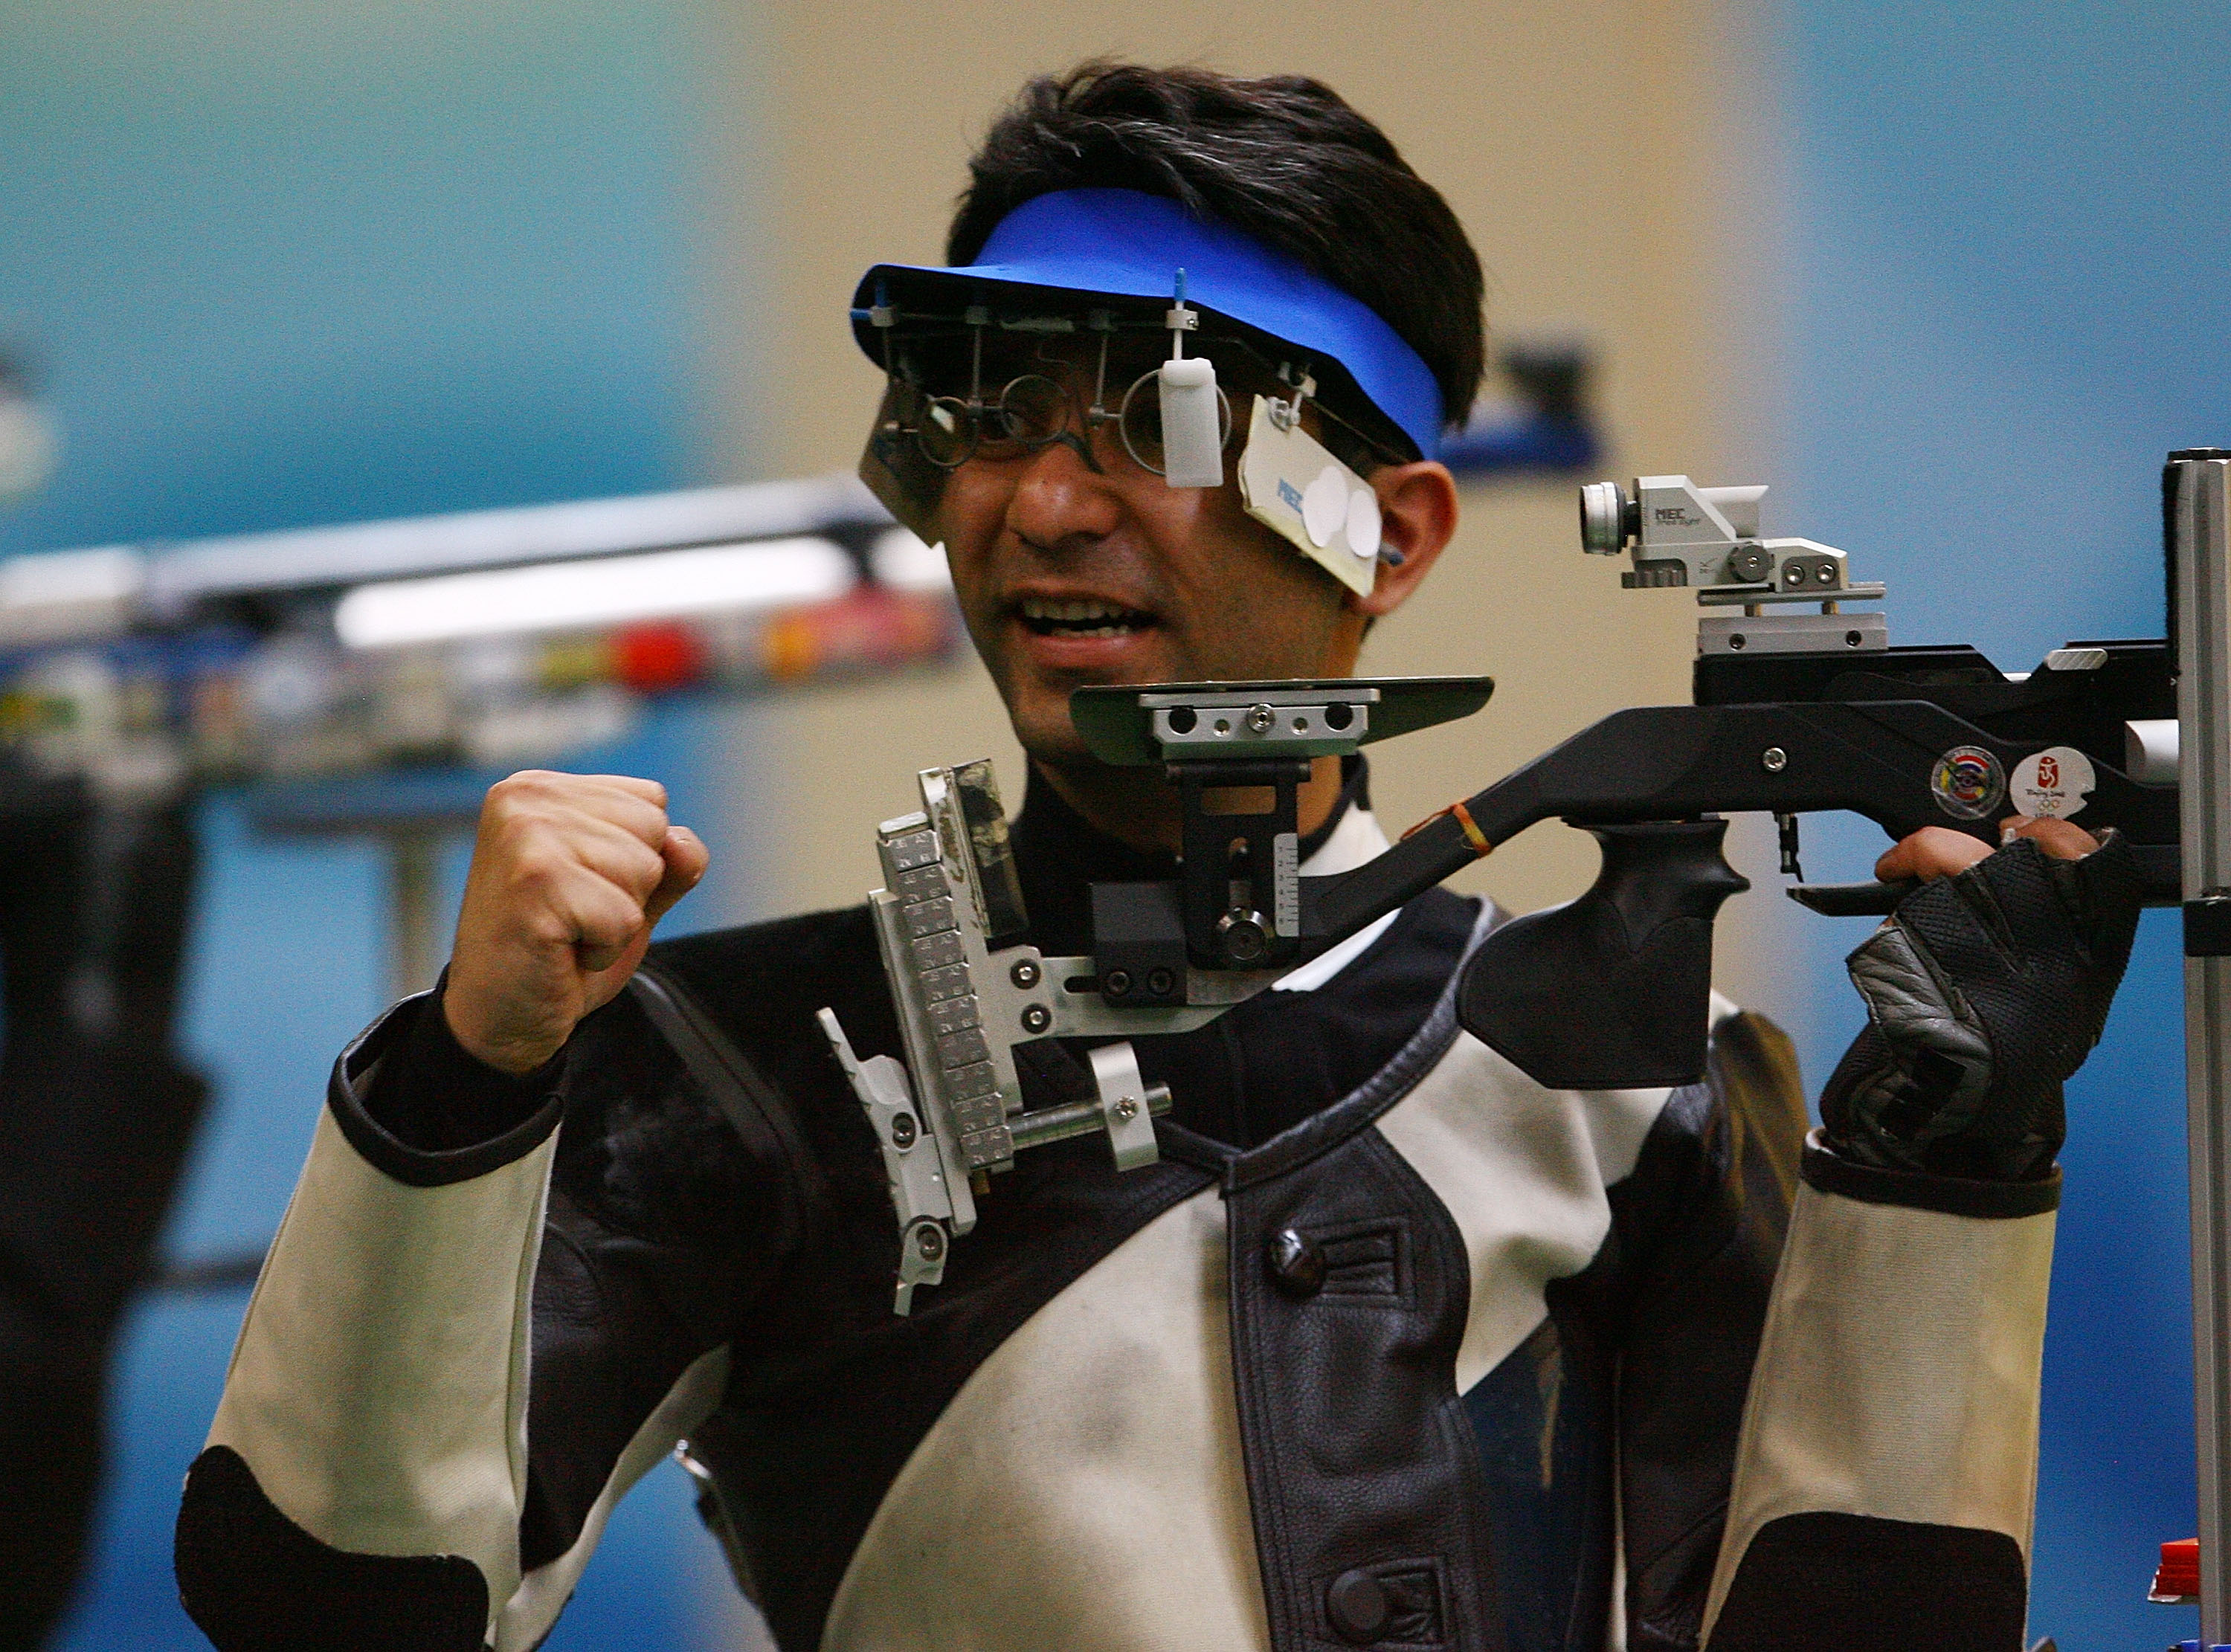 Pathbreakers | Abhinav Bindra’s golden run in Beijing 2008 and a shot in the arm for brighter future